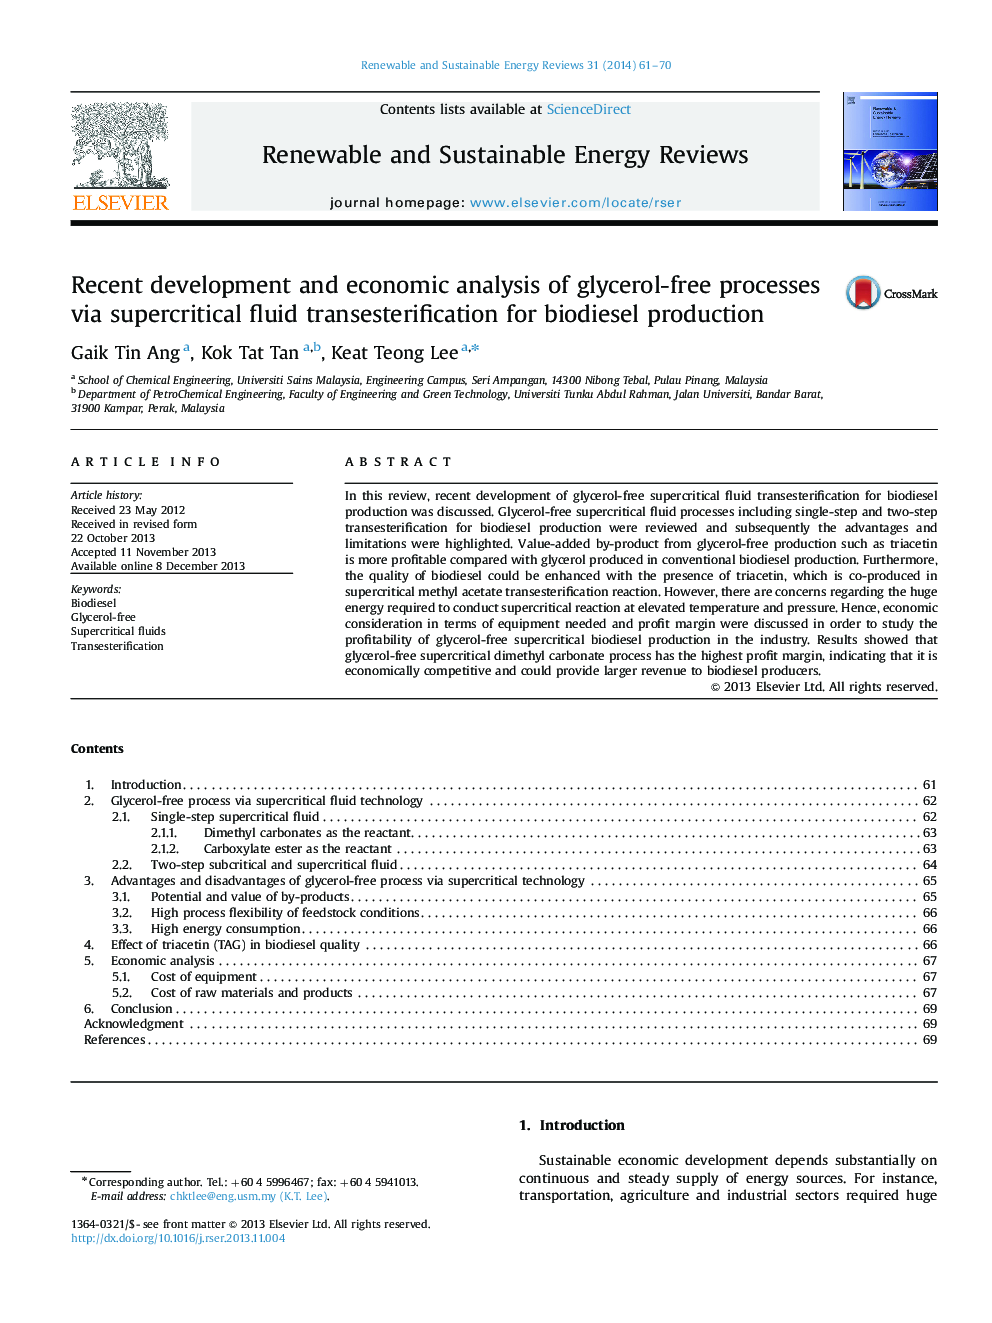 Recent development and economic analysis of glycerol-free processes via supercritical fluid transesterification for biodiesel production